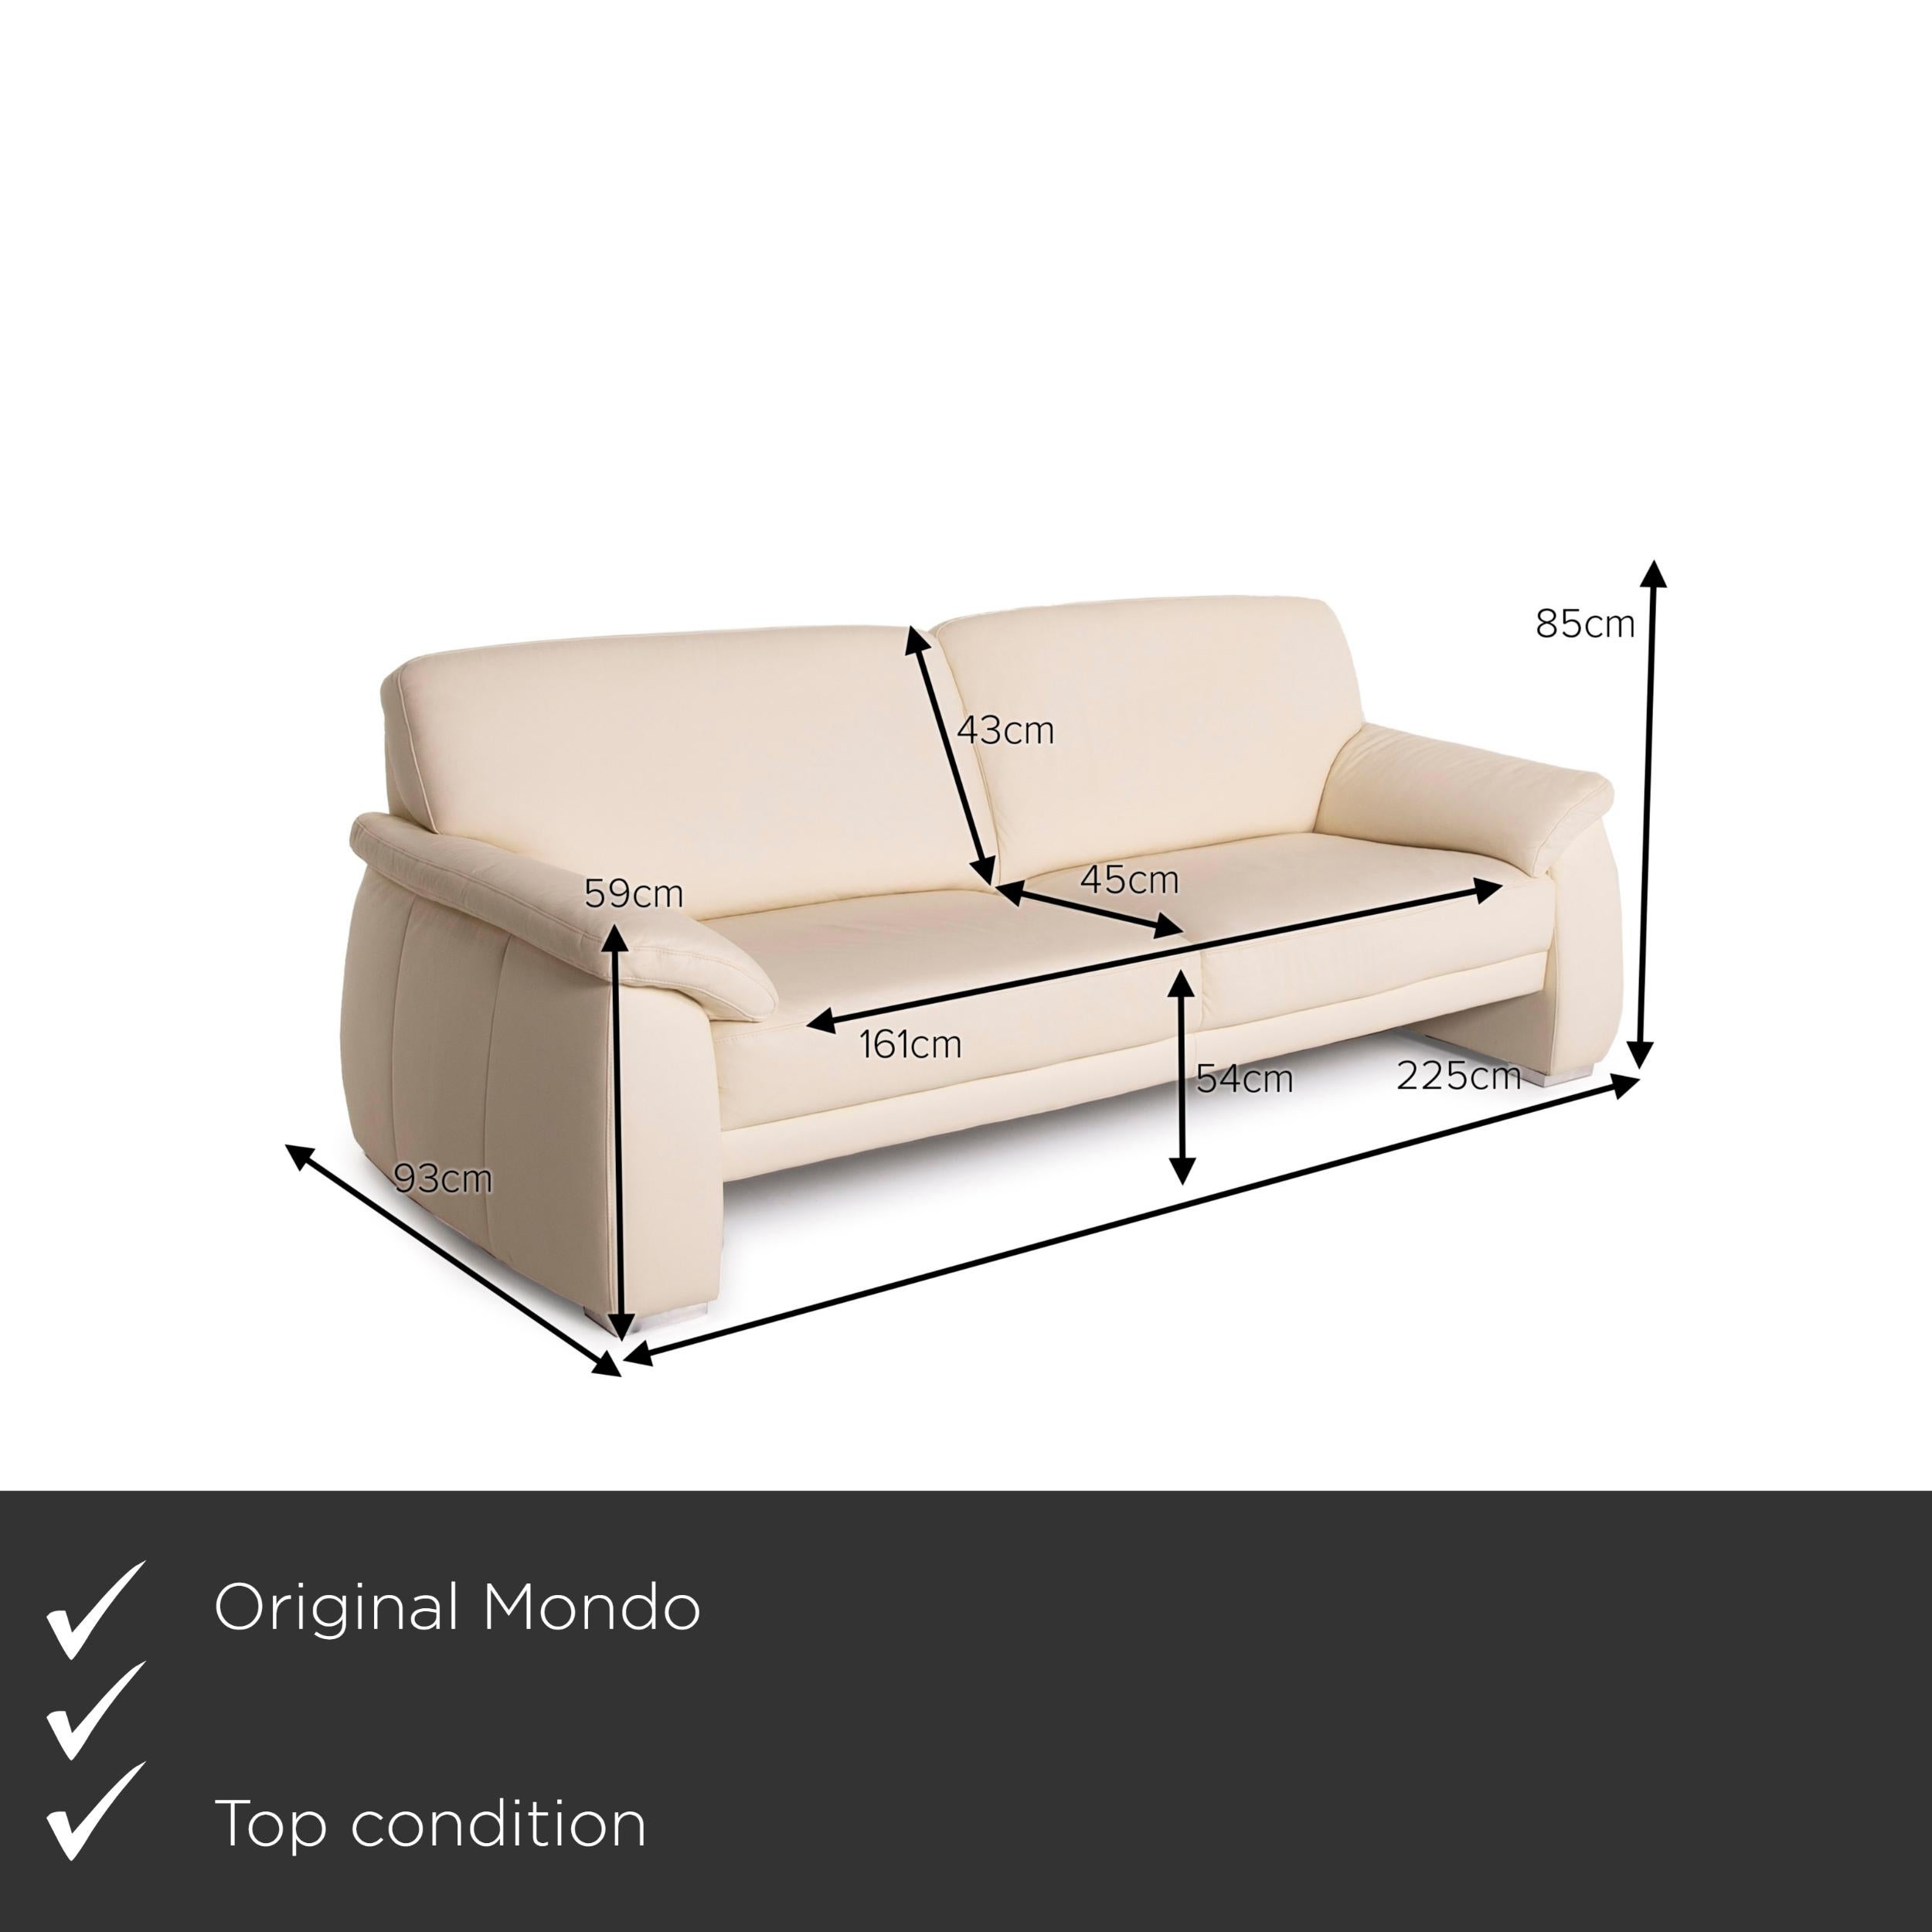 We present to you a Mondo leather sofa cream three-seater.
 
 

 Product measurements in centimeters:
 

Depth: 93
Width: 225
Height: 85
Seat height: 54
Rest height: 59
Seat depth: 45
Seat width: 161
Back height: 43.